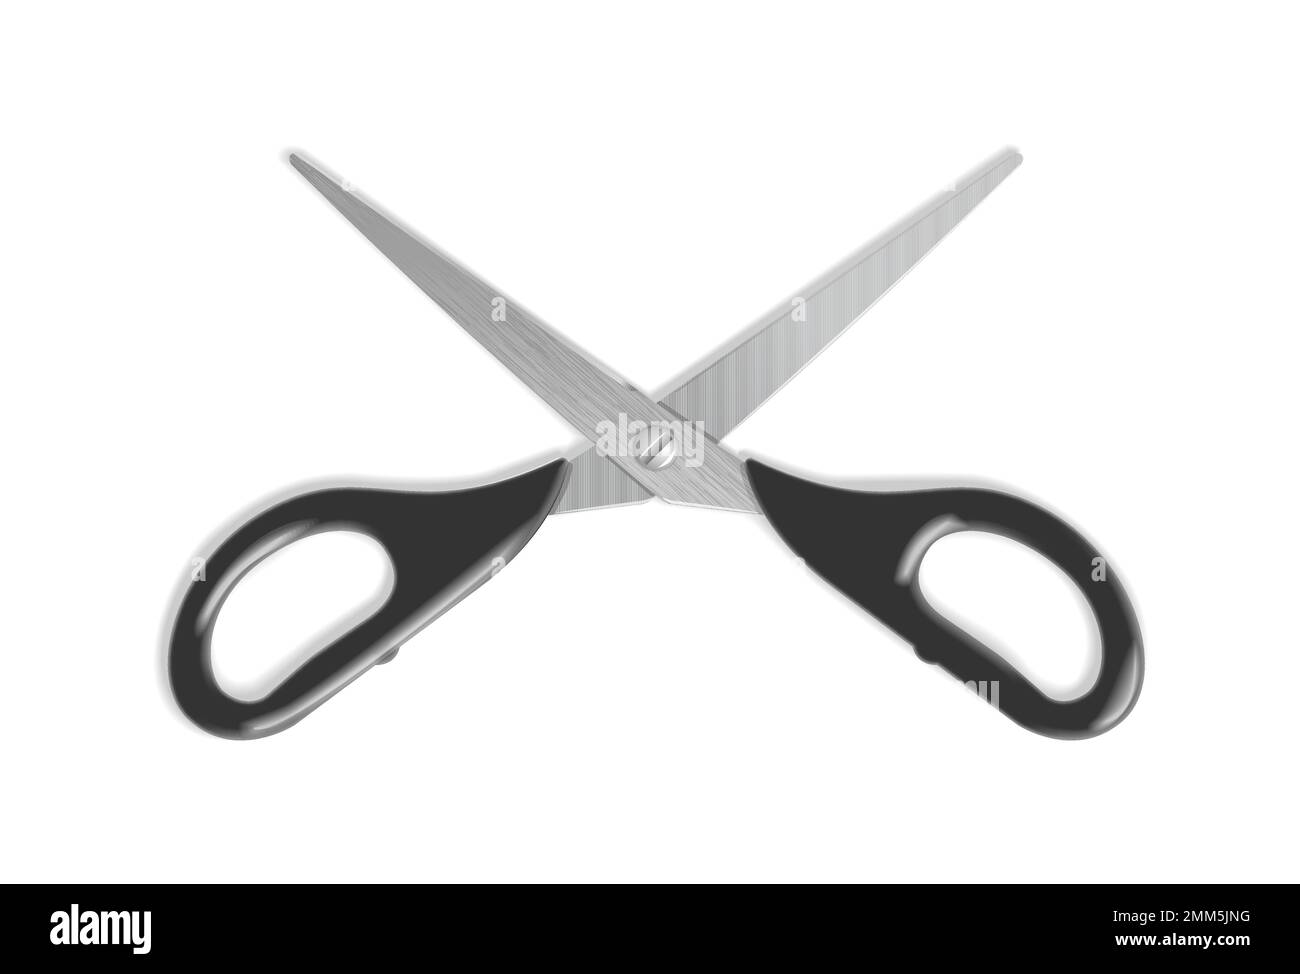 Realistic scissors with black handles. Professional or hobby tool. Detailed graphic design element. Office supply, school stationery. Isolated on whit Stock Vector